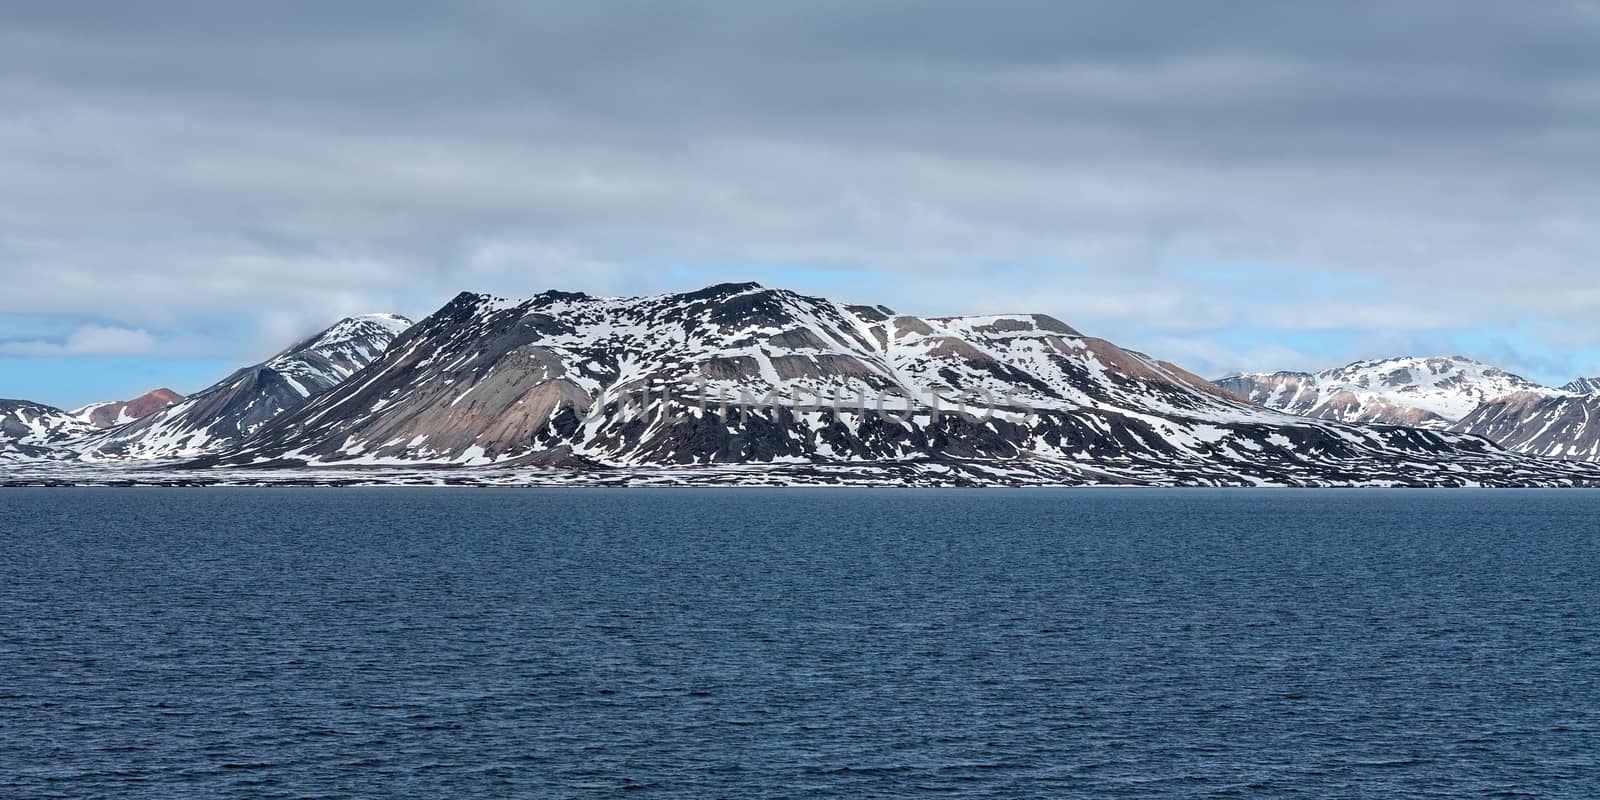 Panoramic view of the mountain range in Svalbard islands, Norway